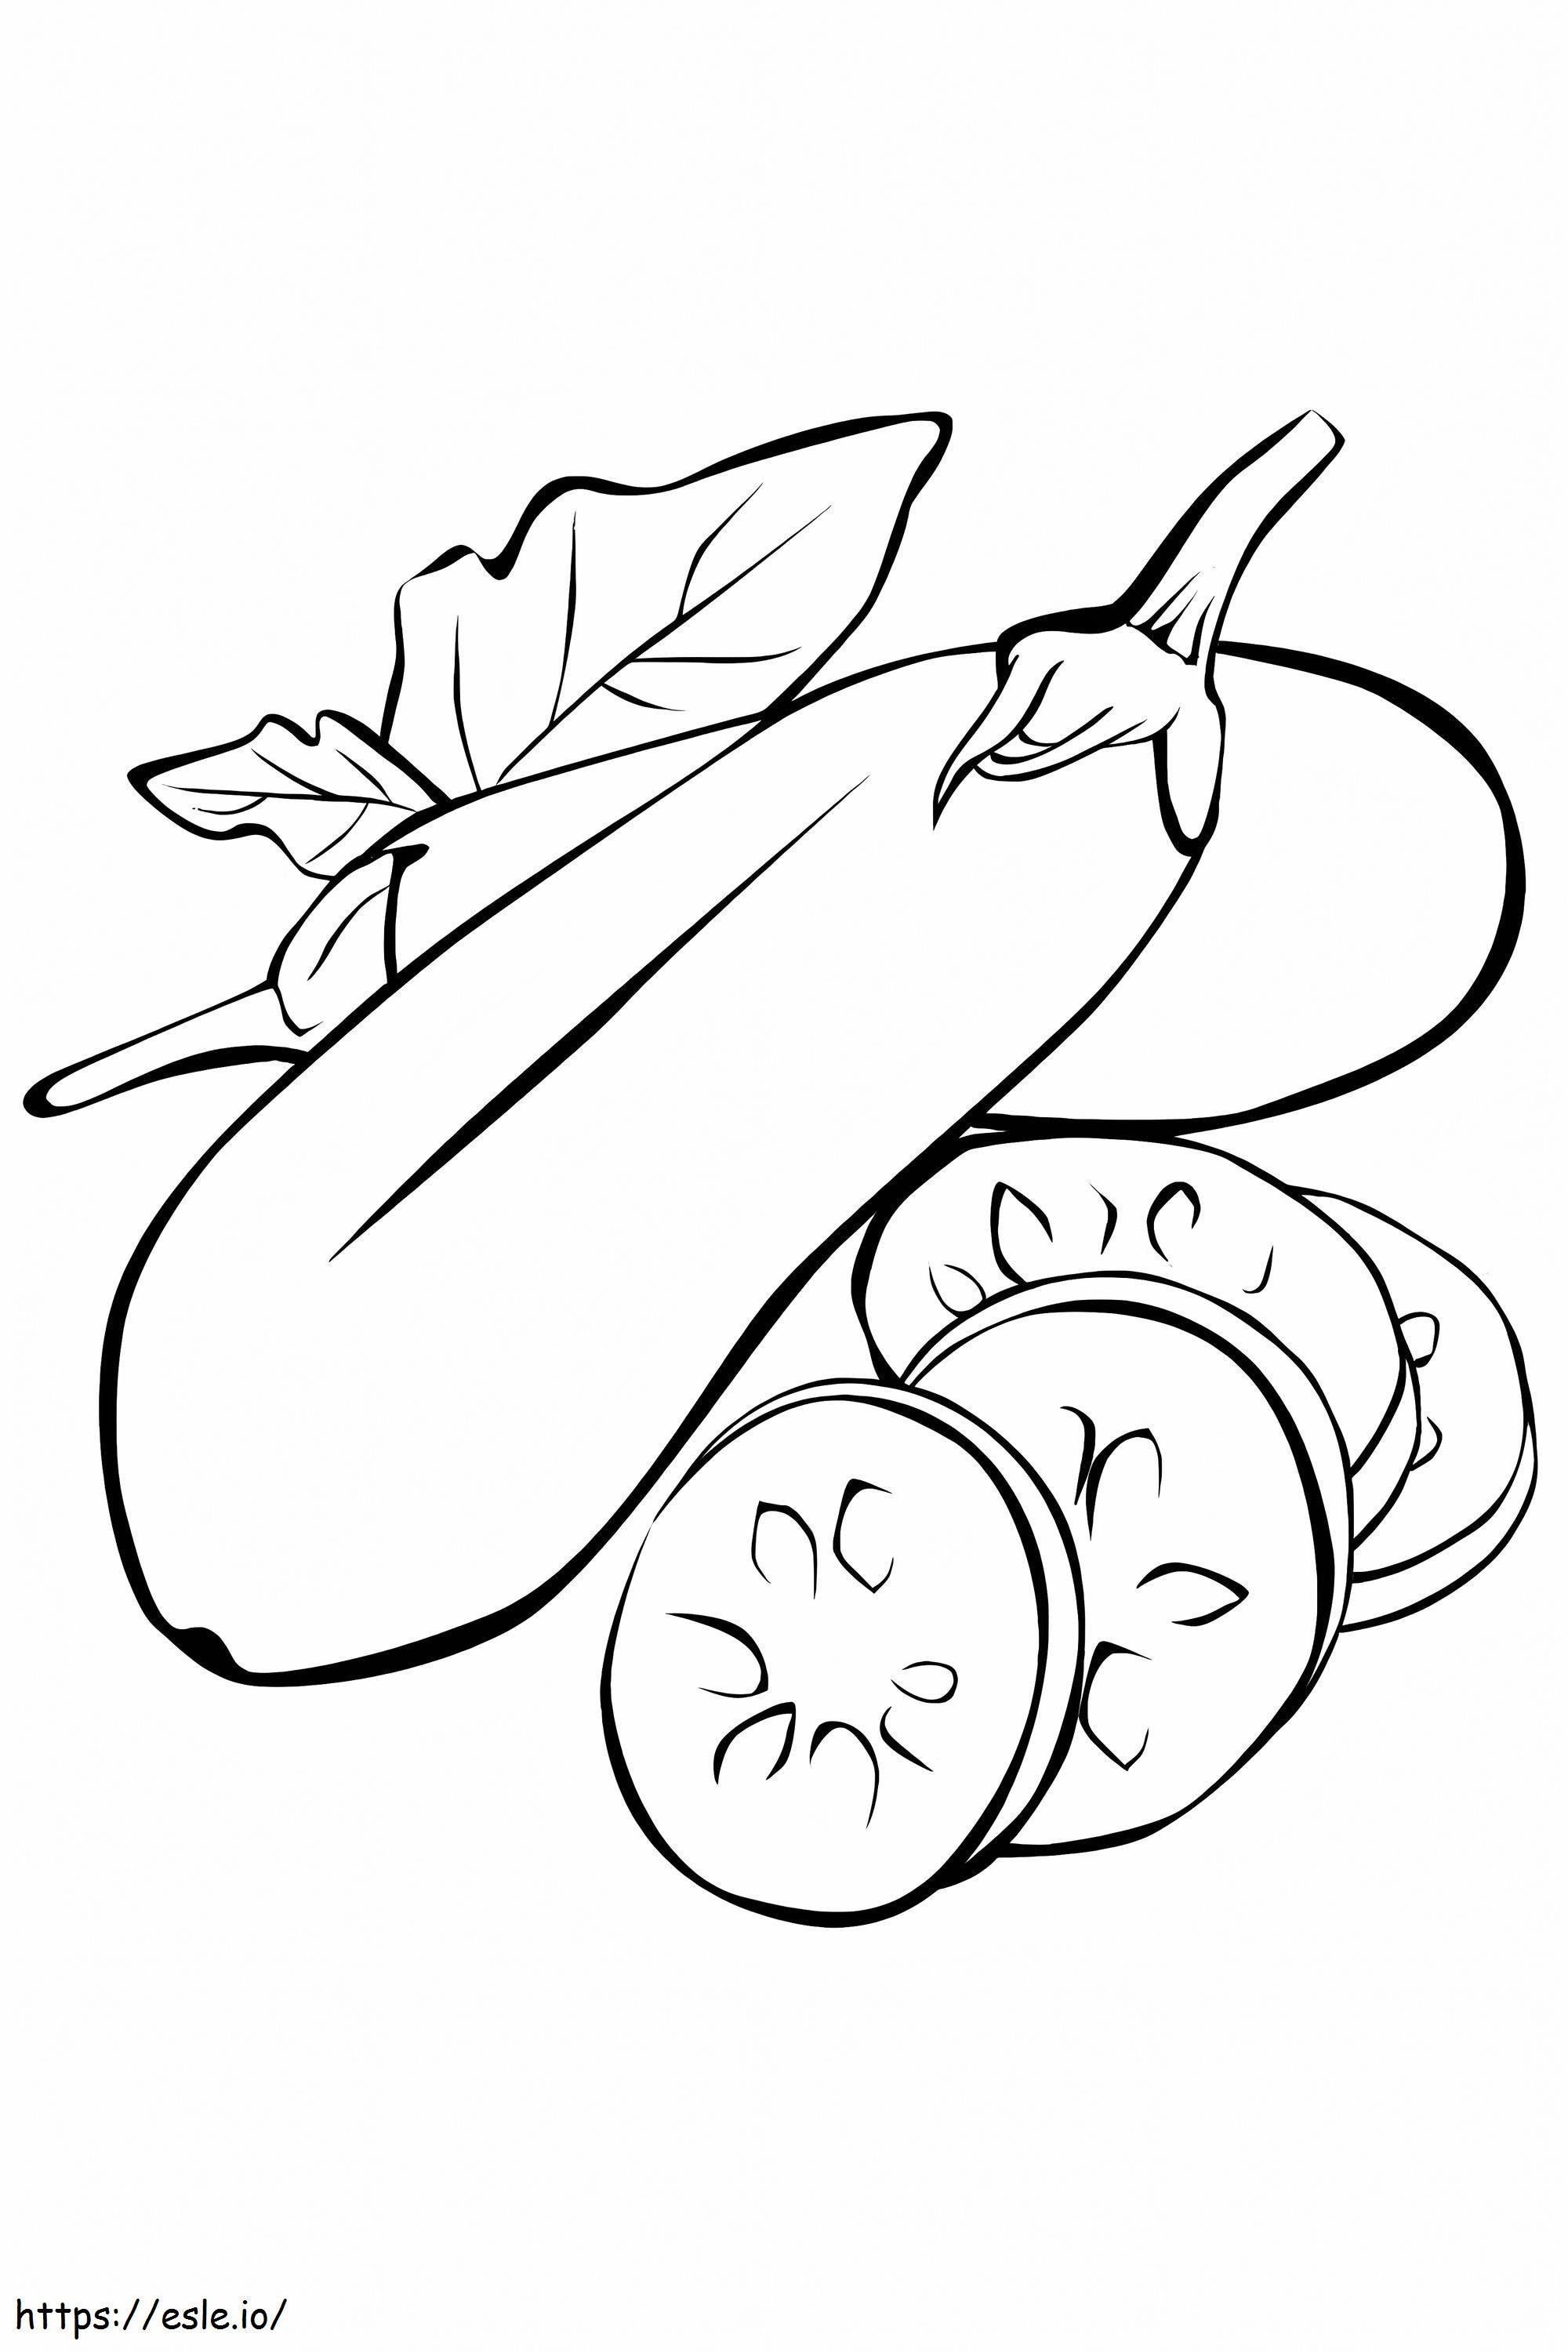 Eggplant Online coloring page